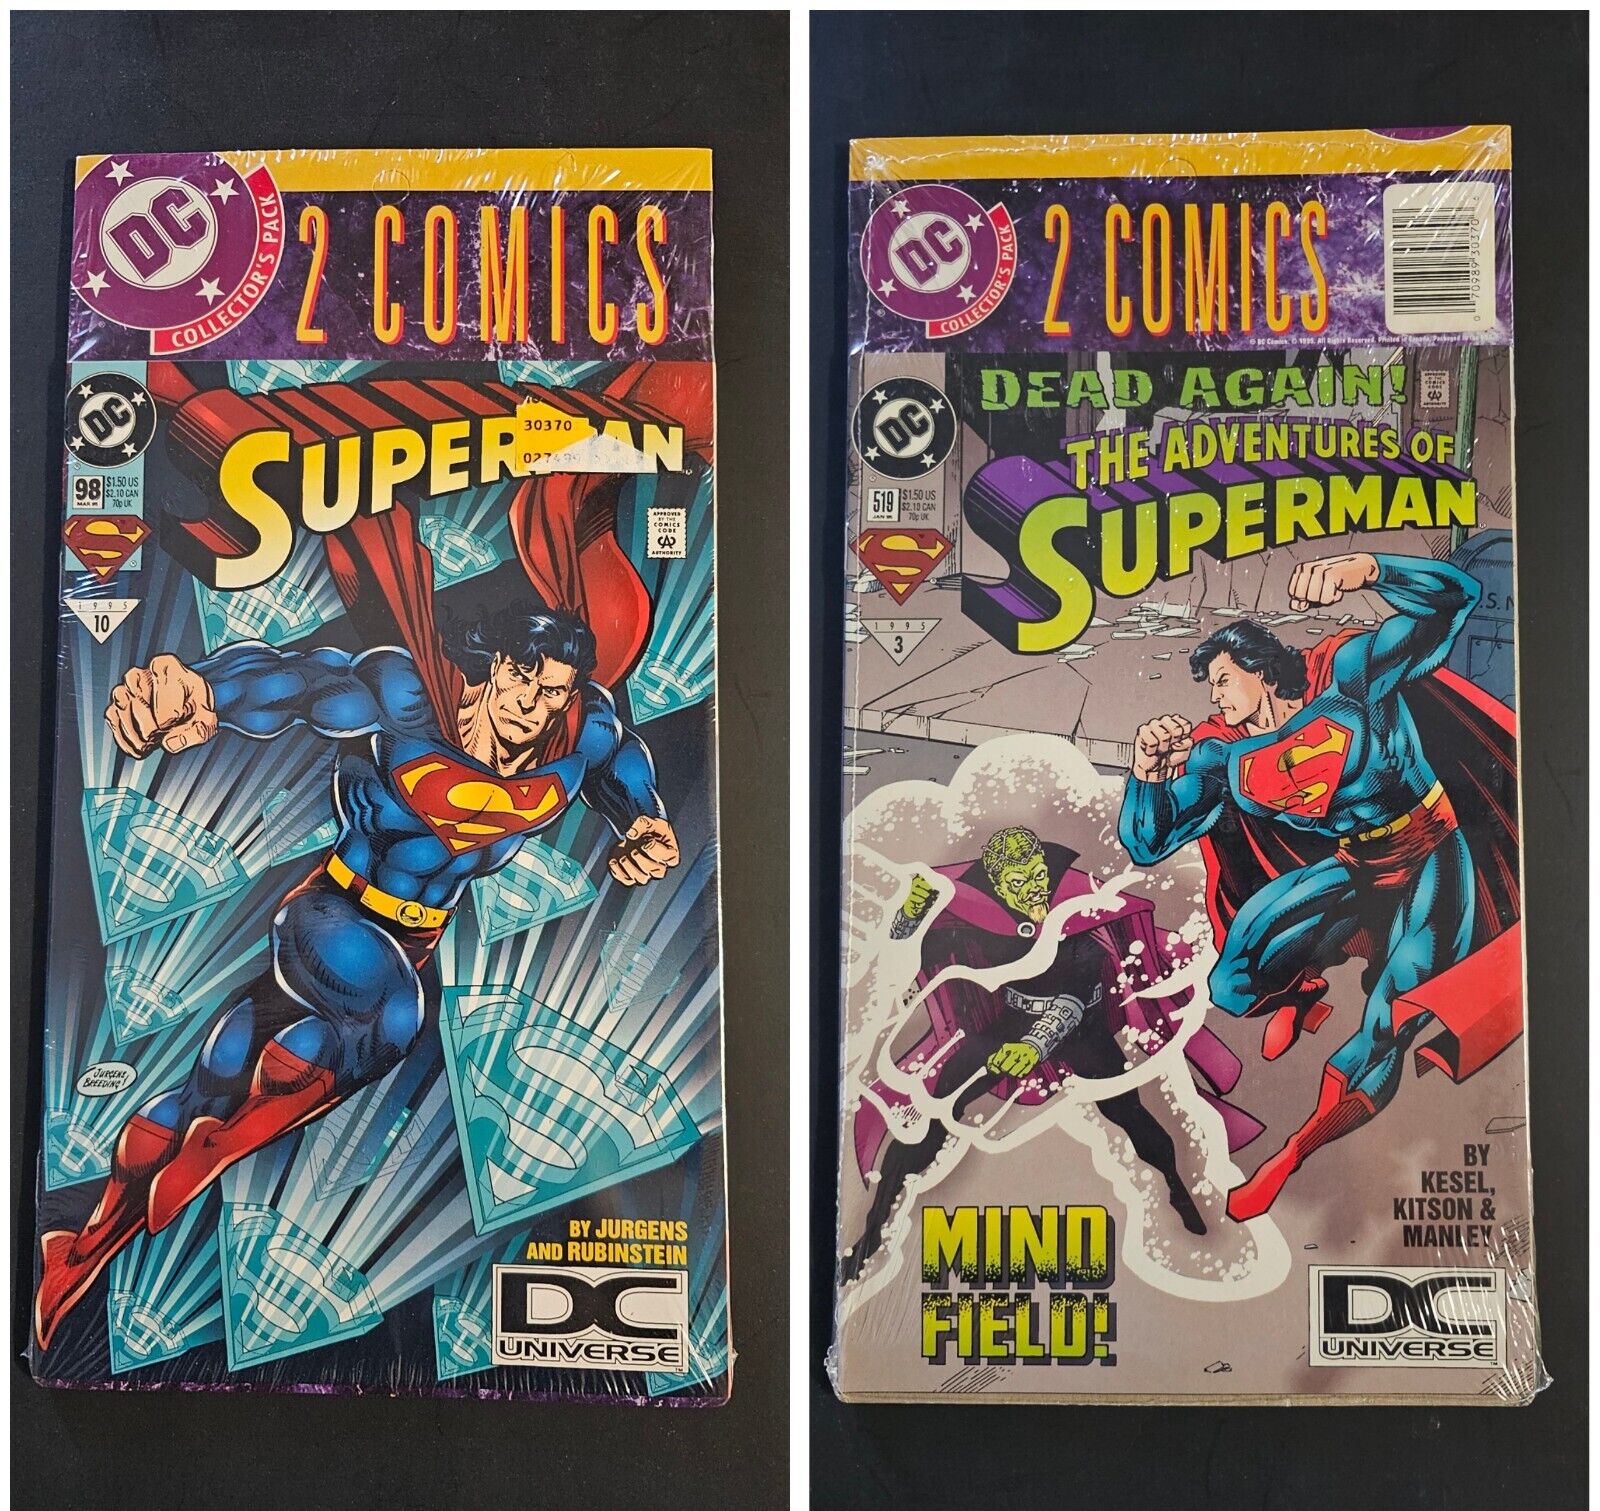 🍒 RARE SUPERMAN 98 AND ADVENTURES OF SUPERMAN 519 DC UNIVERSE VARIANT VF/NM 🍒